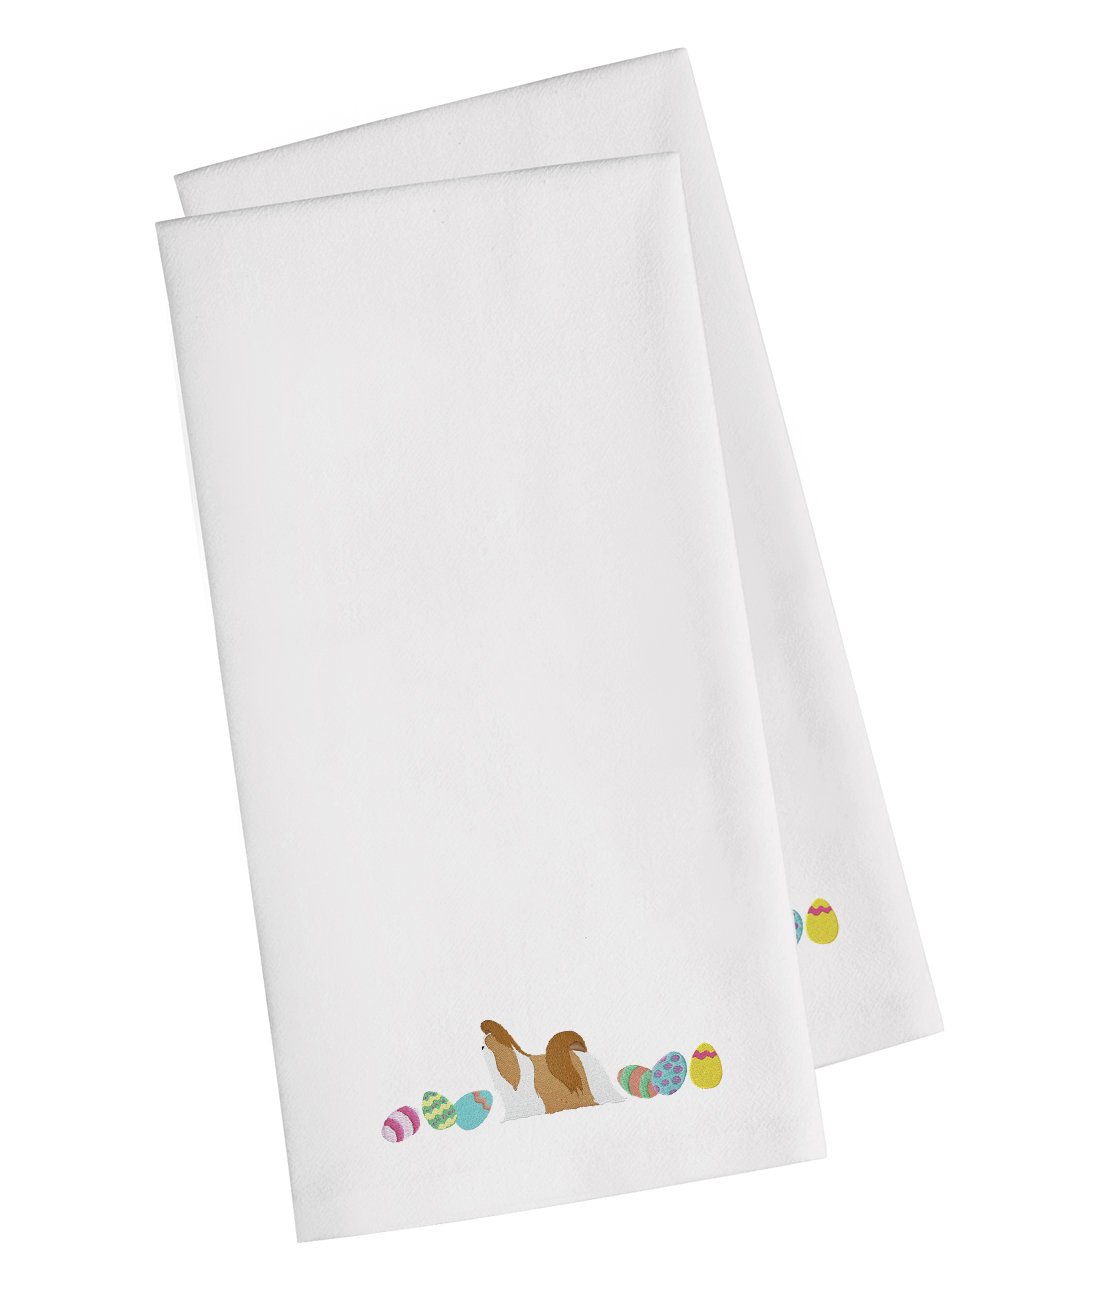 Shih Tzu Easter White Embroidered Kitchen Towel Set of 2 CK1686WHTWE by Caroline's Treasures